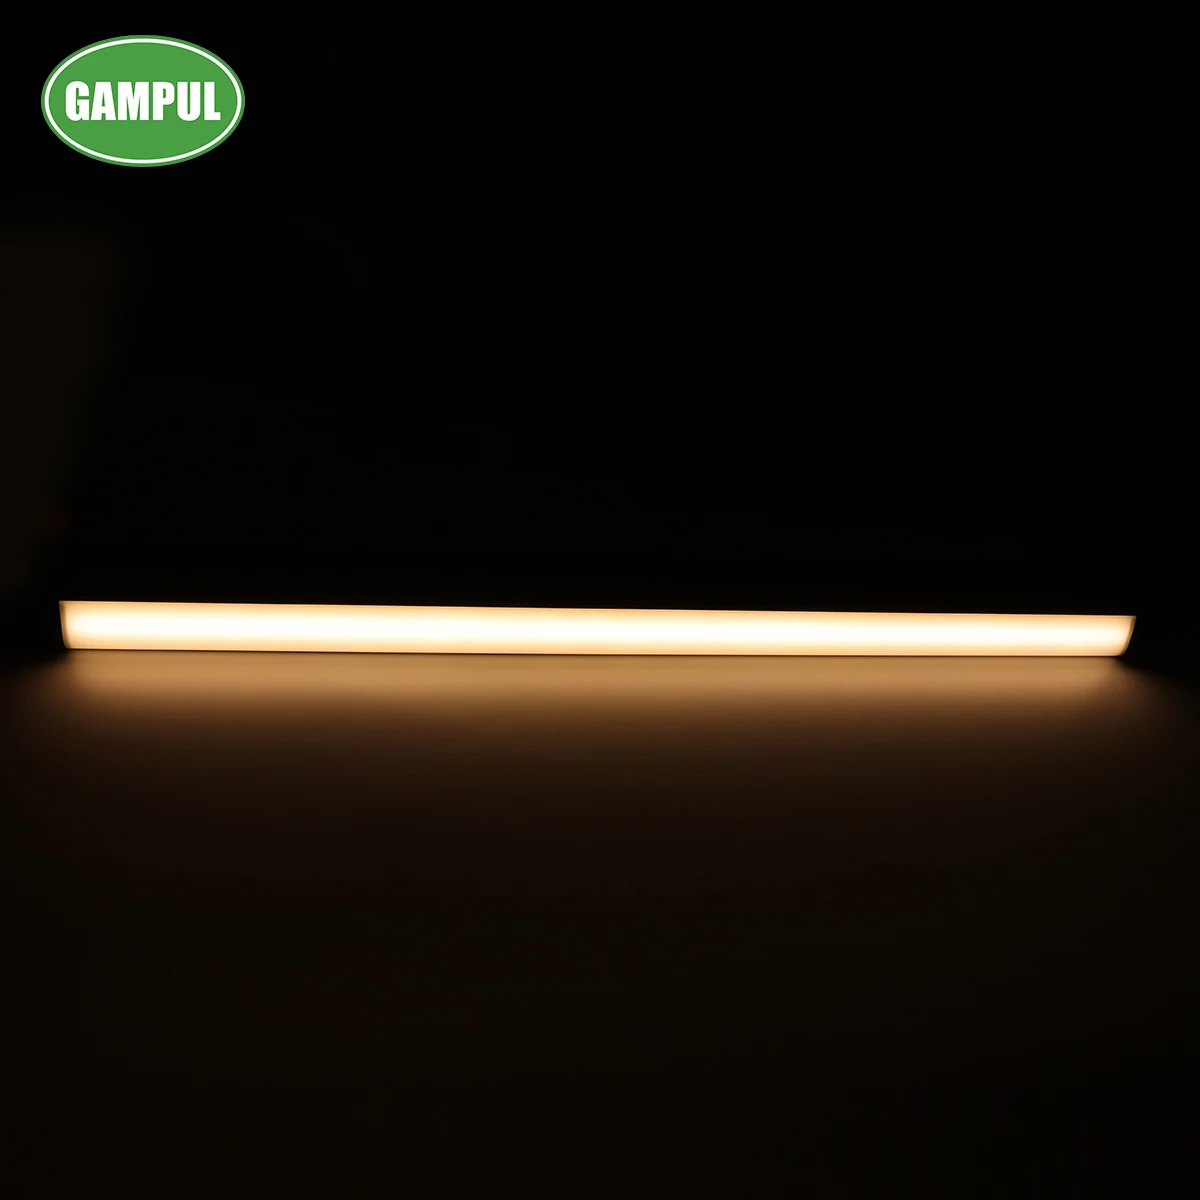 24 Inch Efficient Energy-Saving Dimmable Linkable LED cabinet light for Showcase Wardrobe Kitchen Furniture